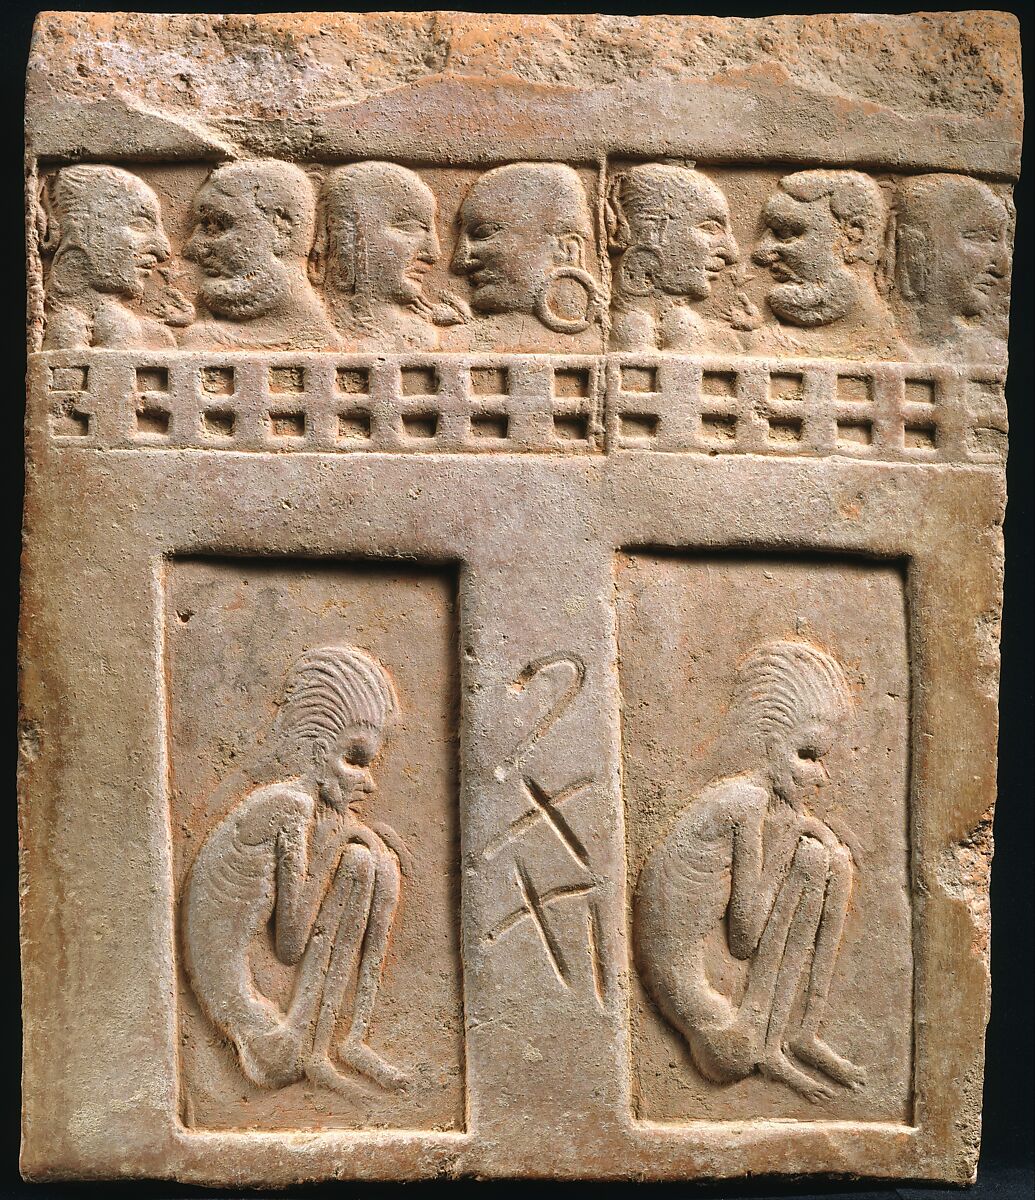 Tile with Impressed Figures of Emaciated Ascetics and Couples Behind Balconies, Terracotta, India (ancient kingdom of Kashmir, Harwan) 